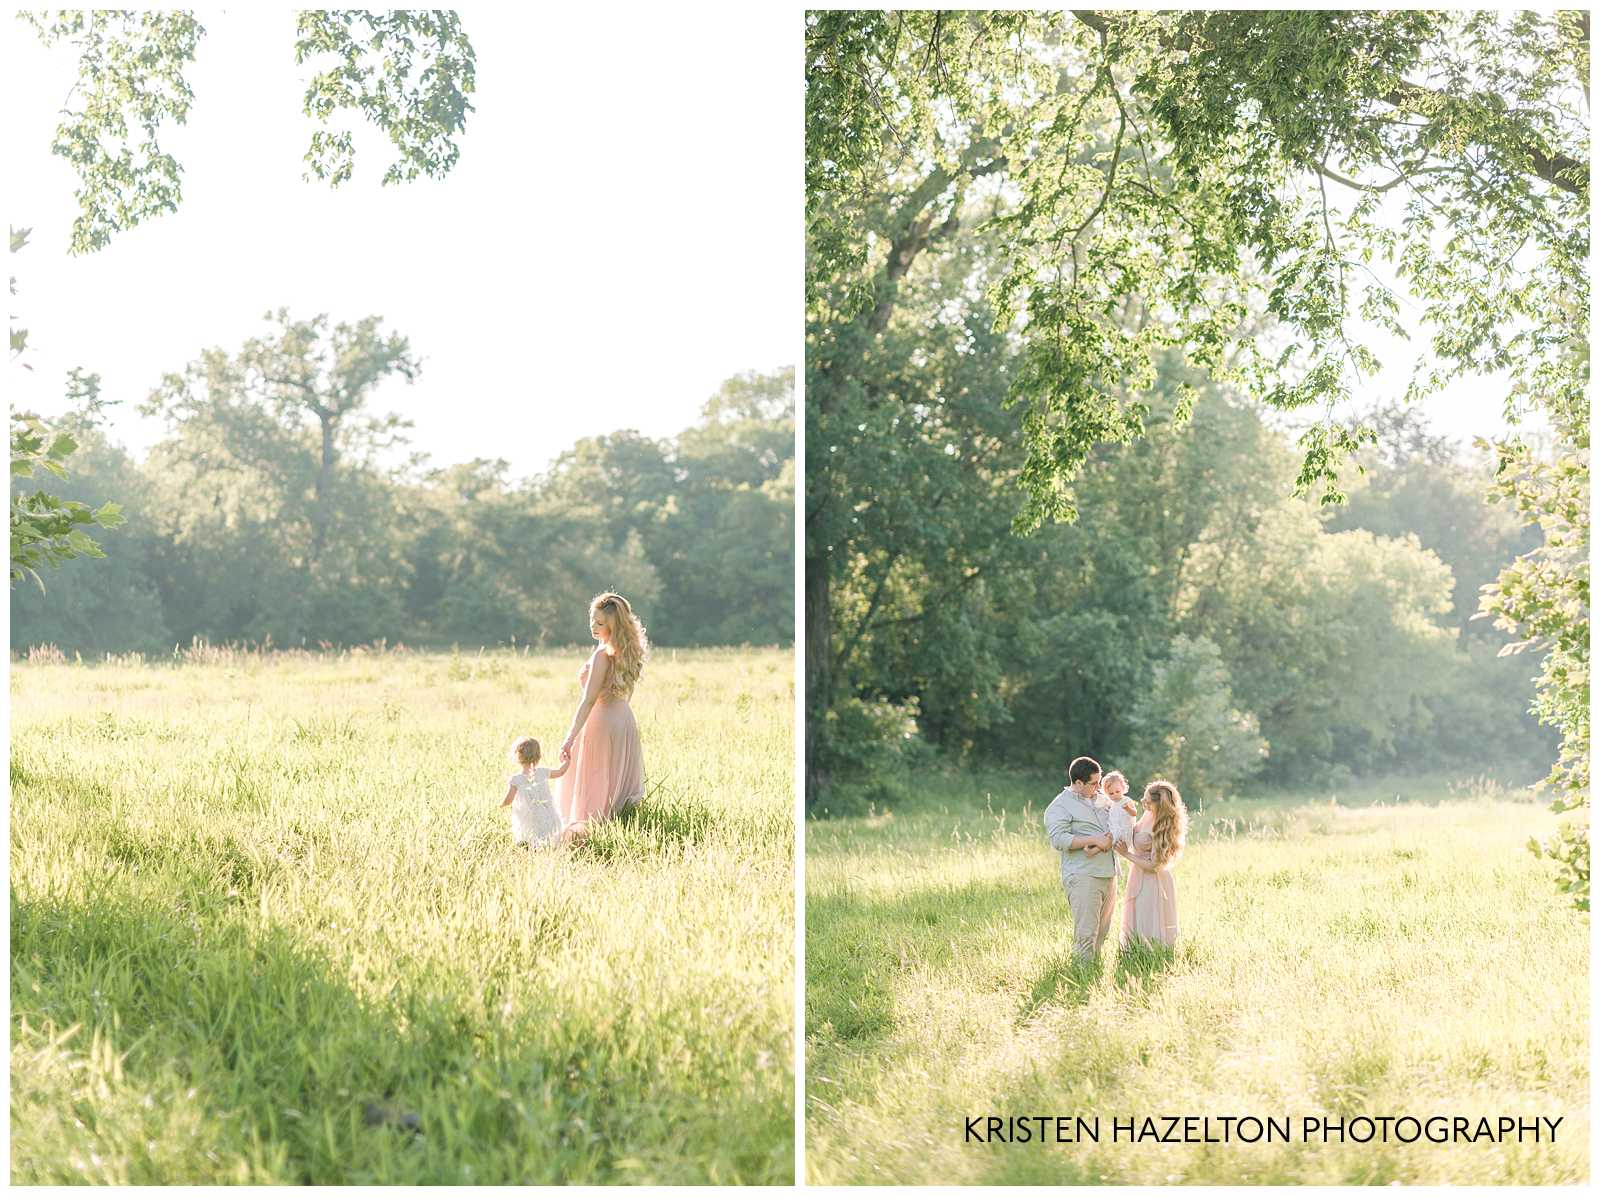 Family of three walking in a sunny meadow